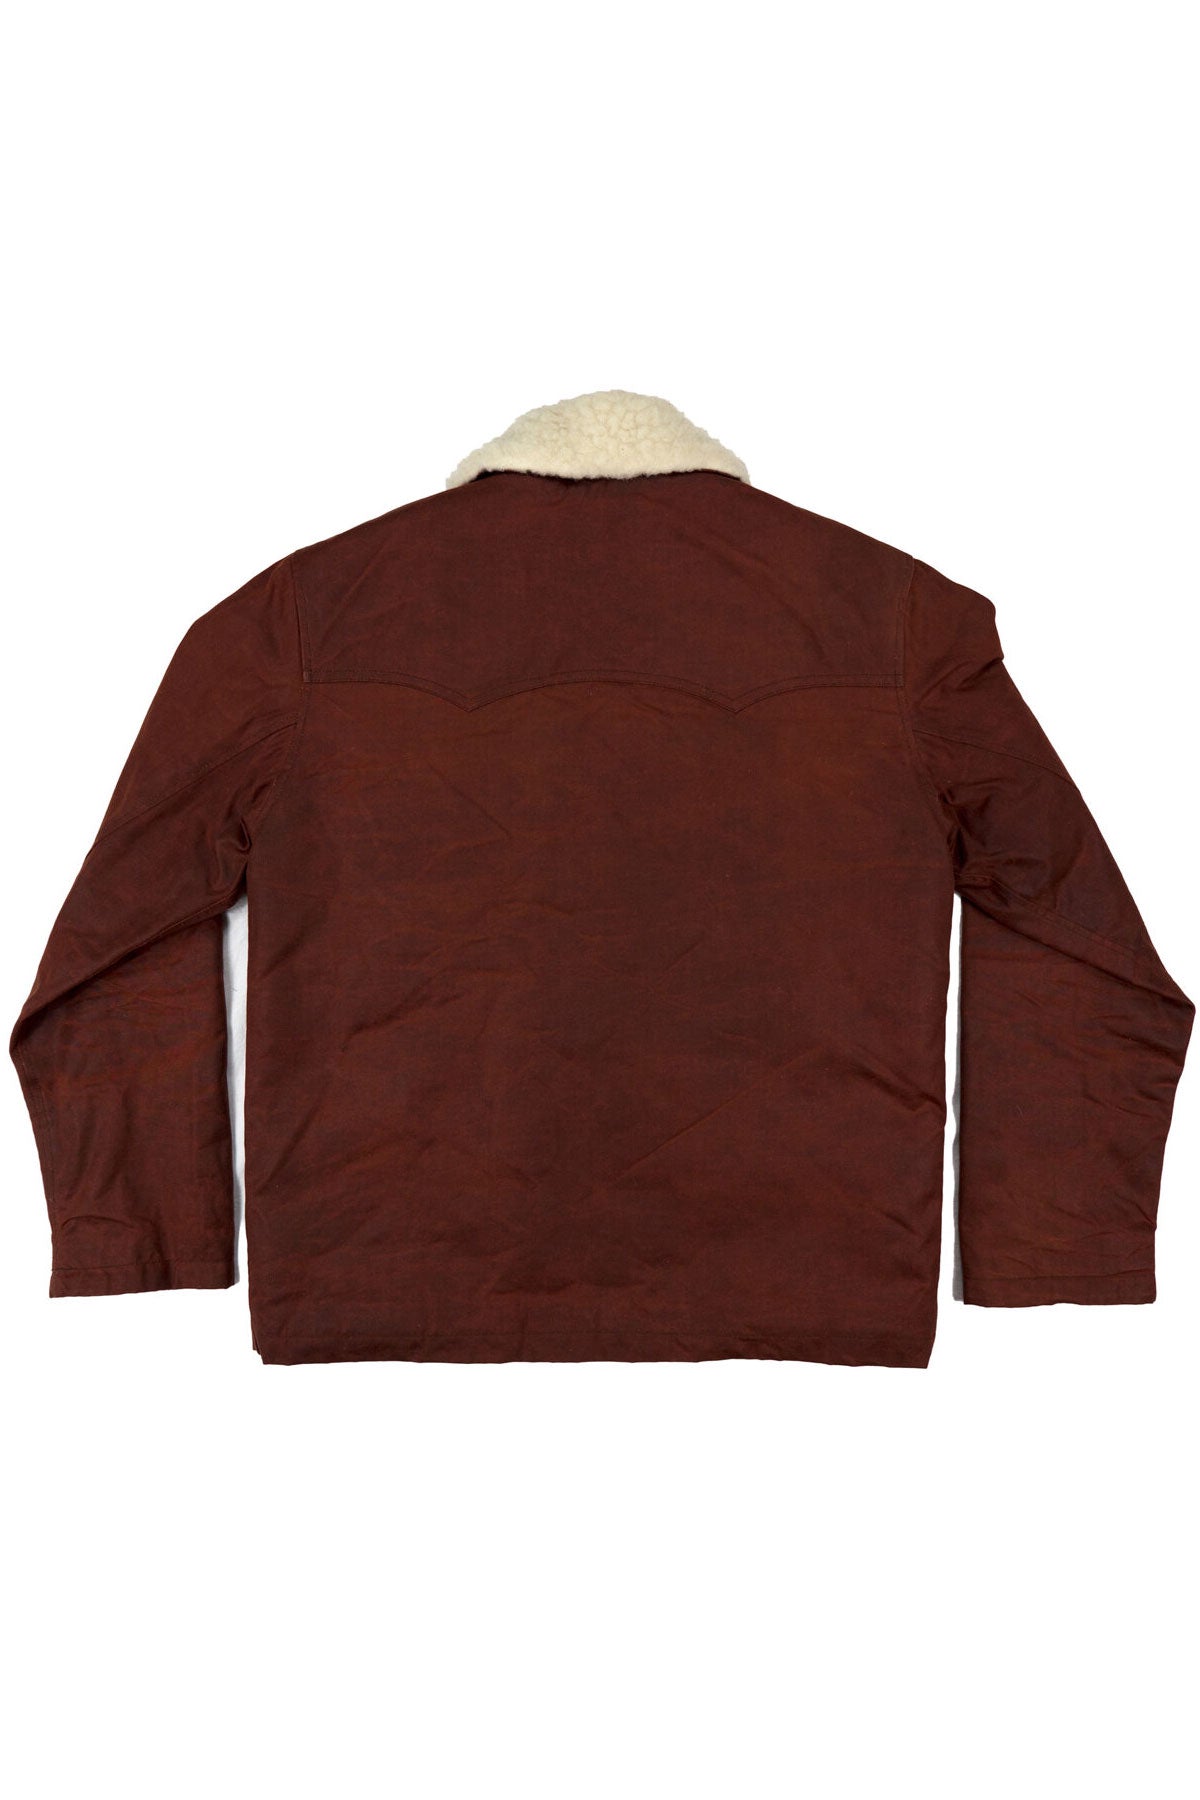 FBC Tailor & Supply - Waxed Canvas Sherpa Coat in Burgundy